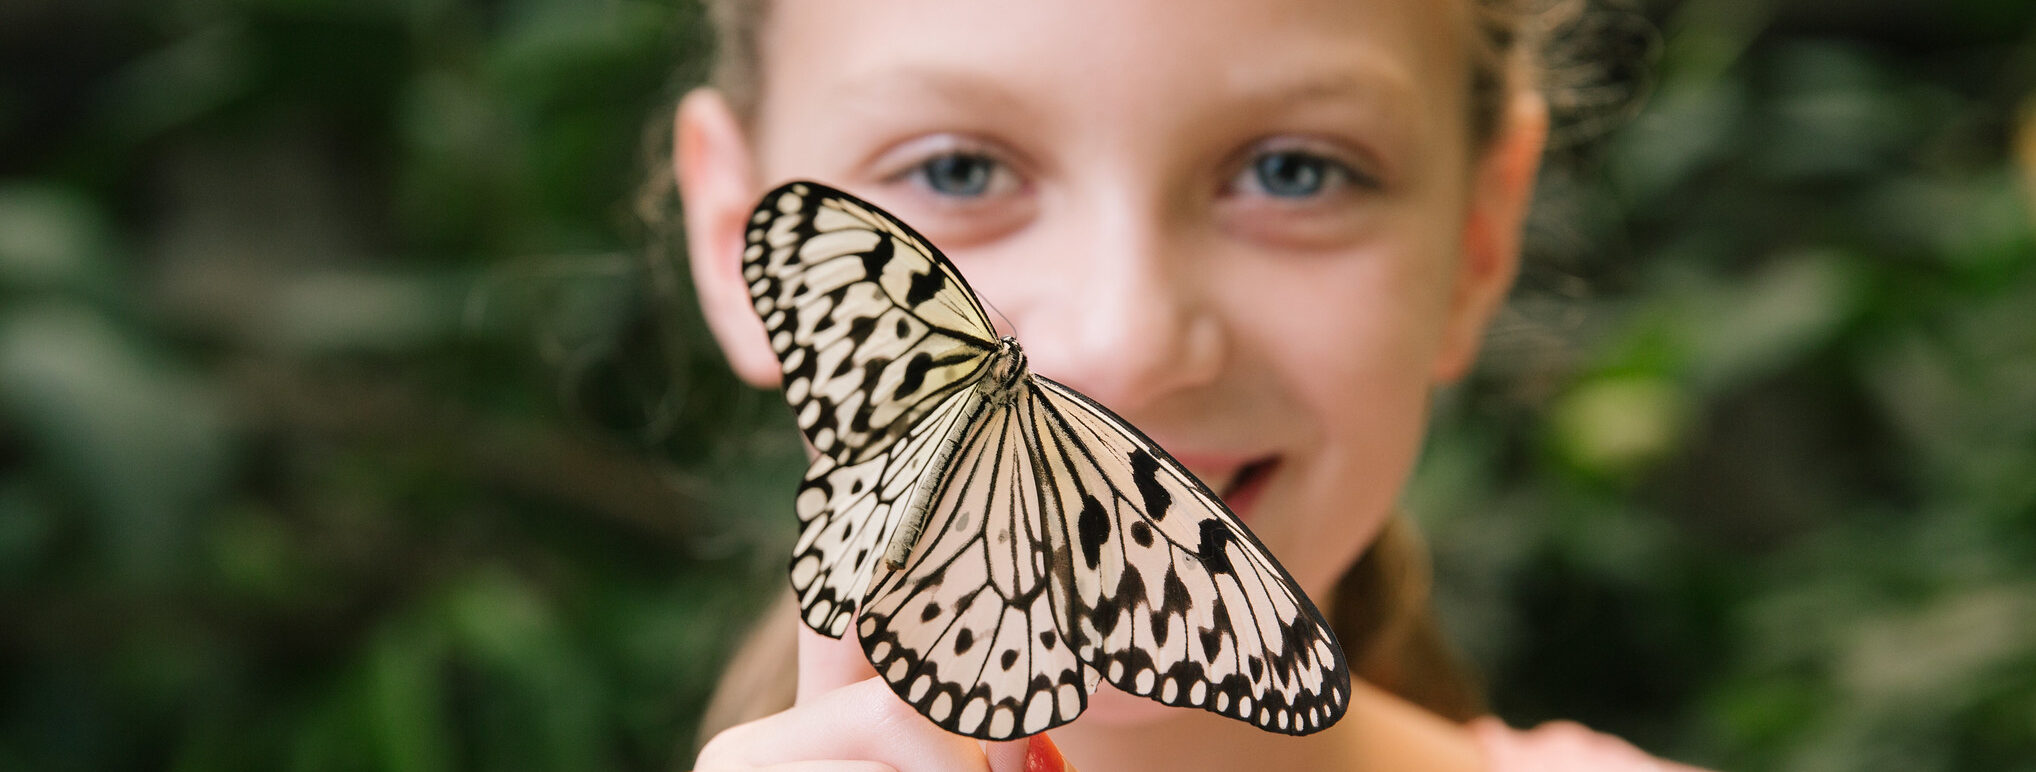 a young girl holding a butterfly up to her face